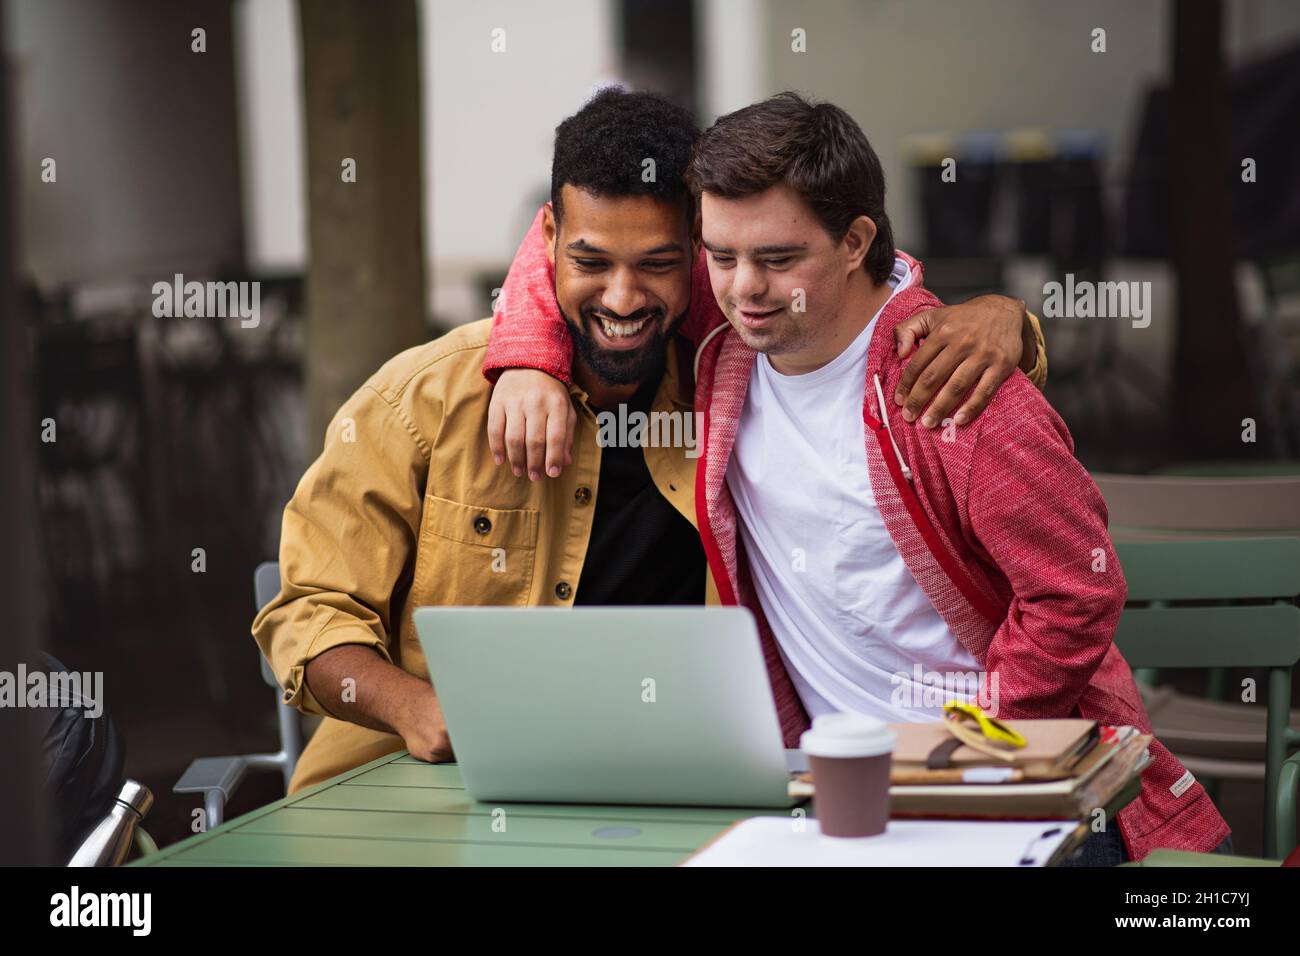 Young man with Down syndrome and mentoring friend with arms around outdoors in cafe using laptop Stock Photo